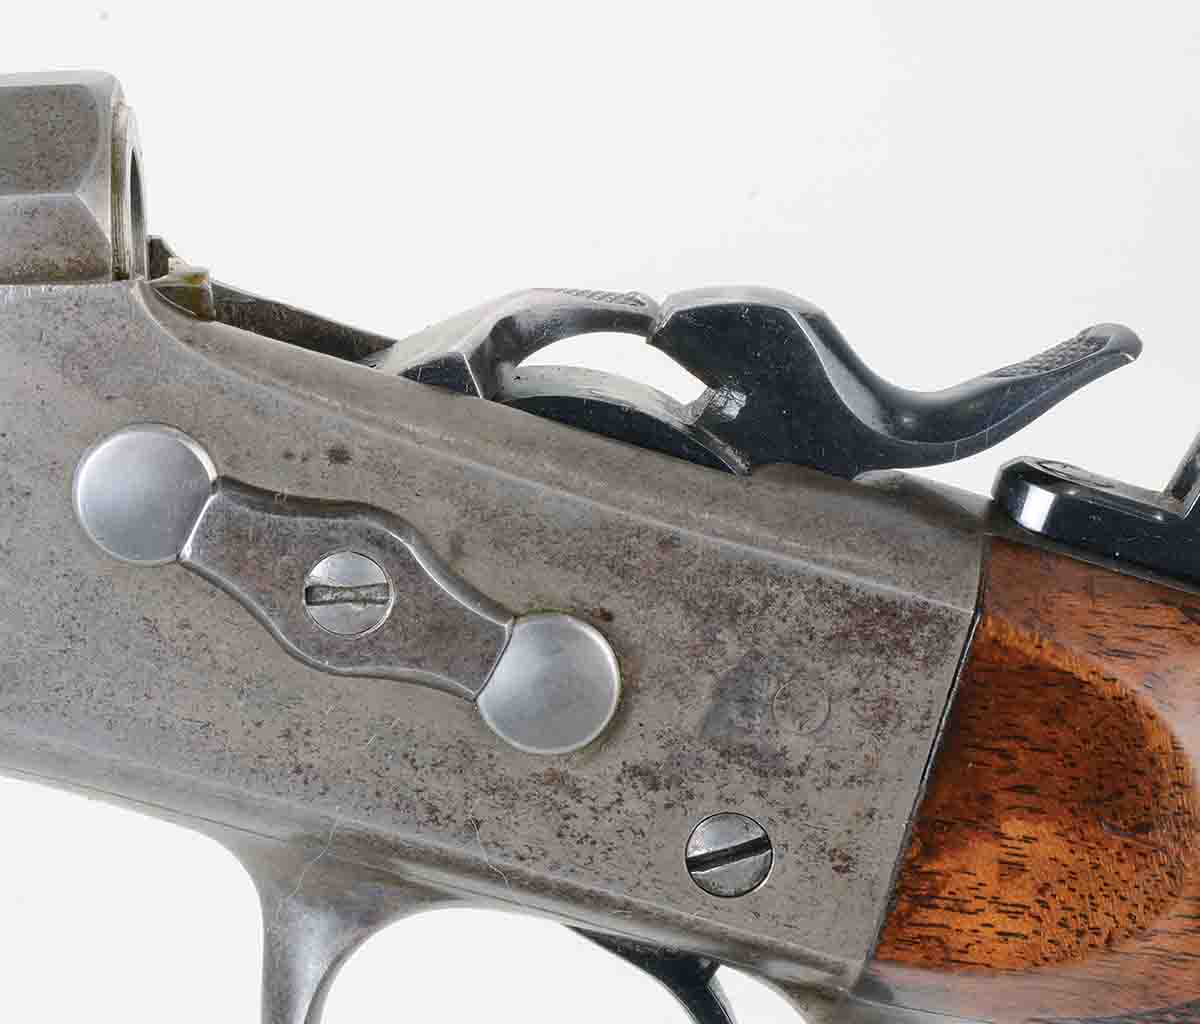 Remington No. 1 rolling blocks were limited to a case length of about 21⁄4 inches, because case rims would interfere with the hammer nose in chambering. Note the two hardened pins on which rolling block hammers and breechblocks pivoted.